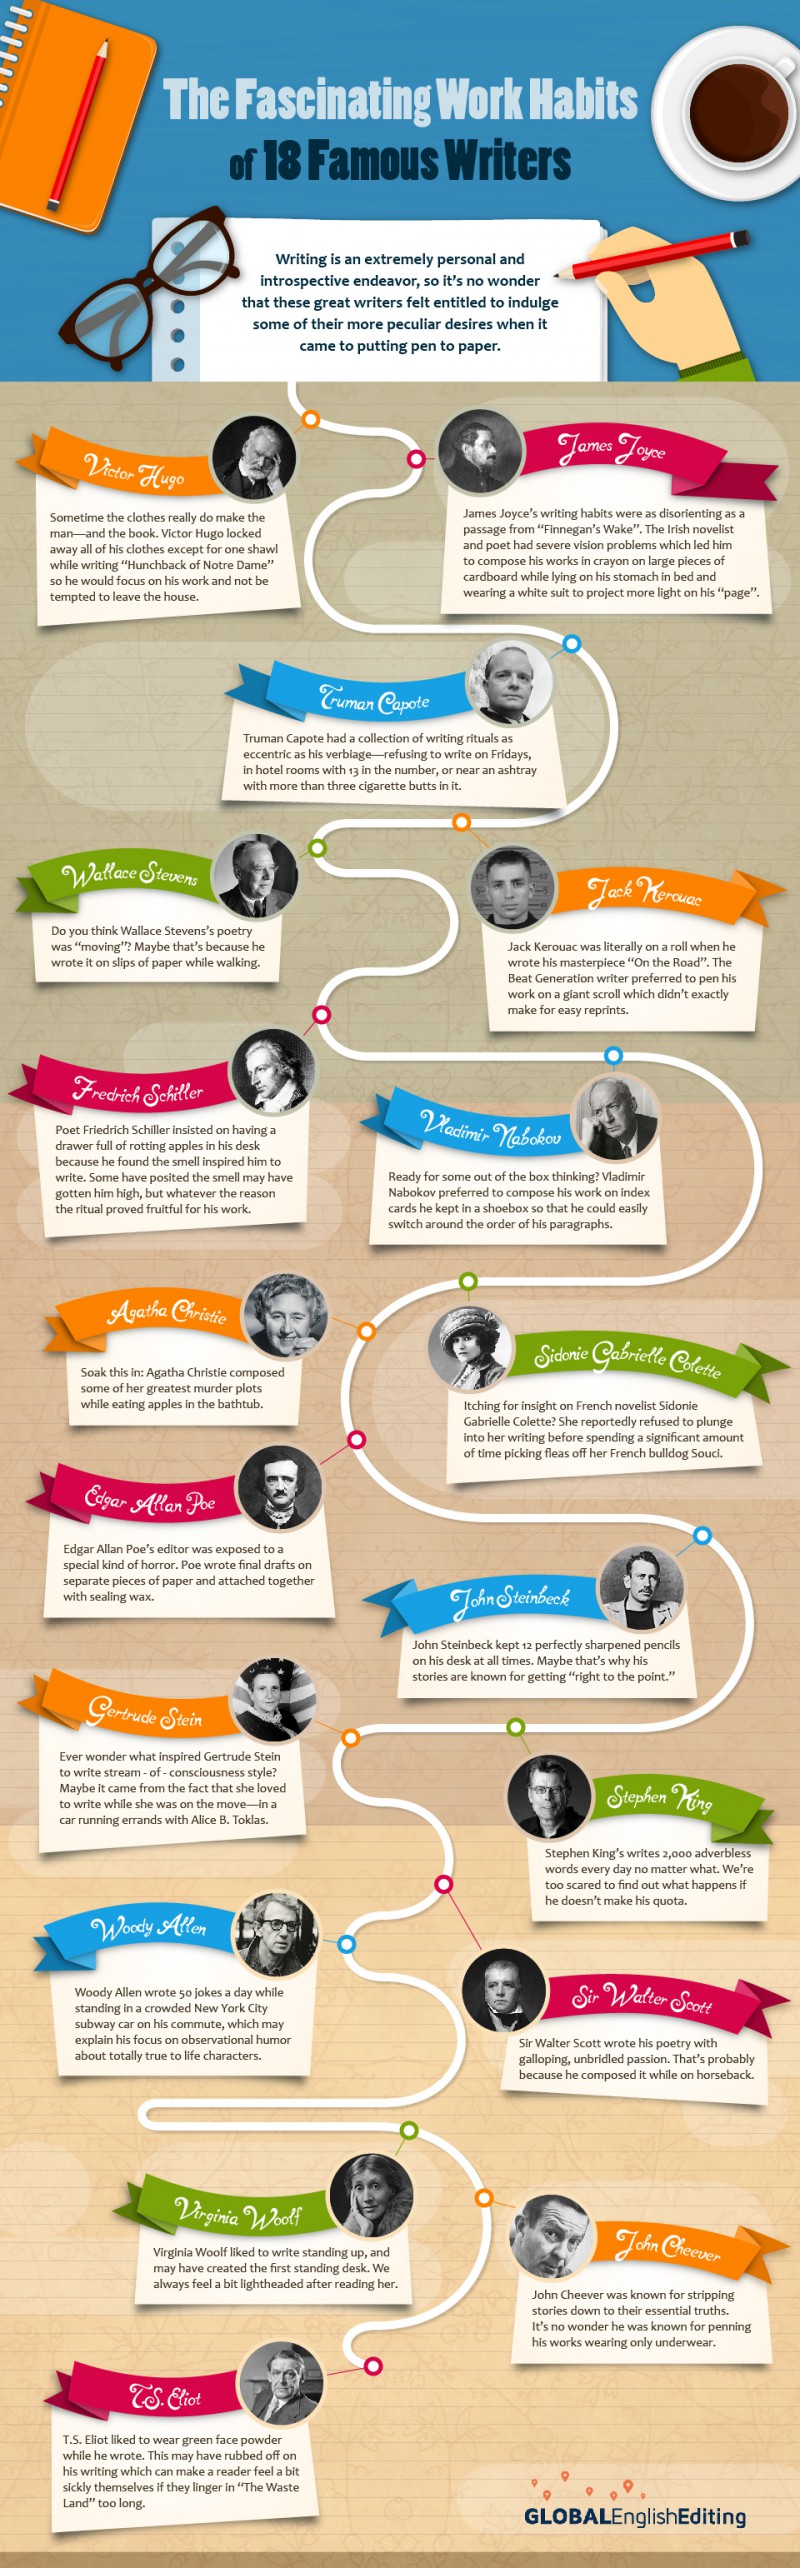 unusual habits of famous writers